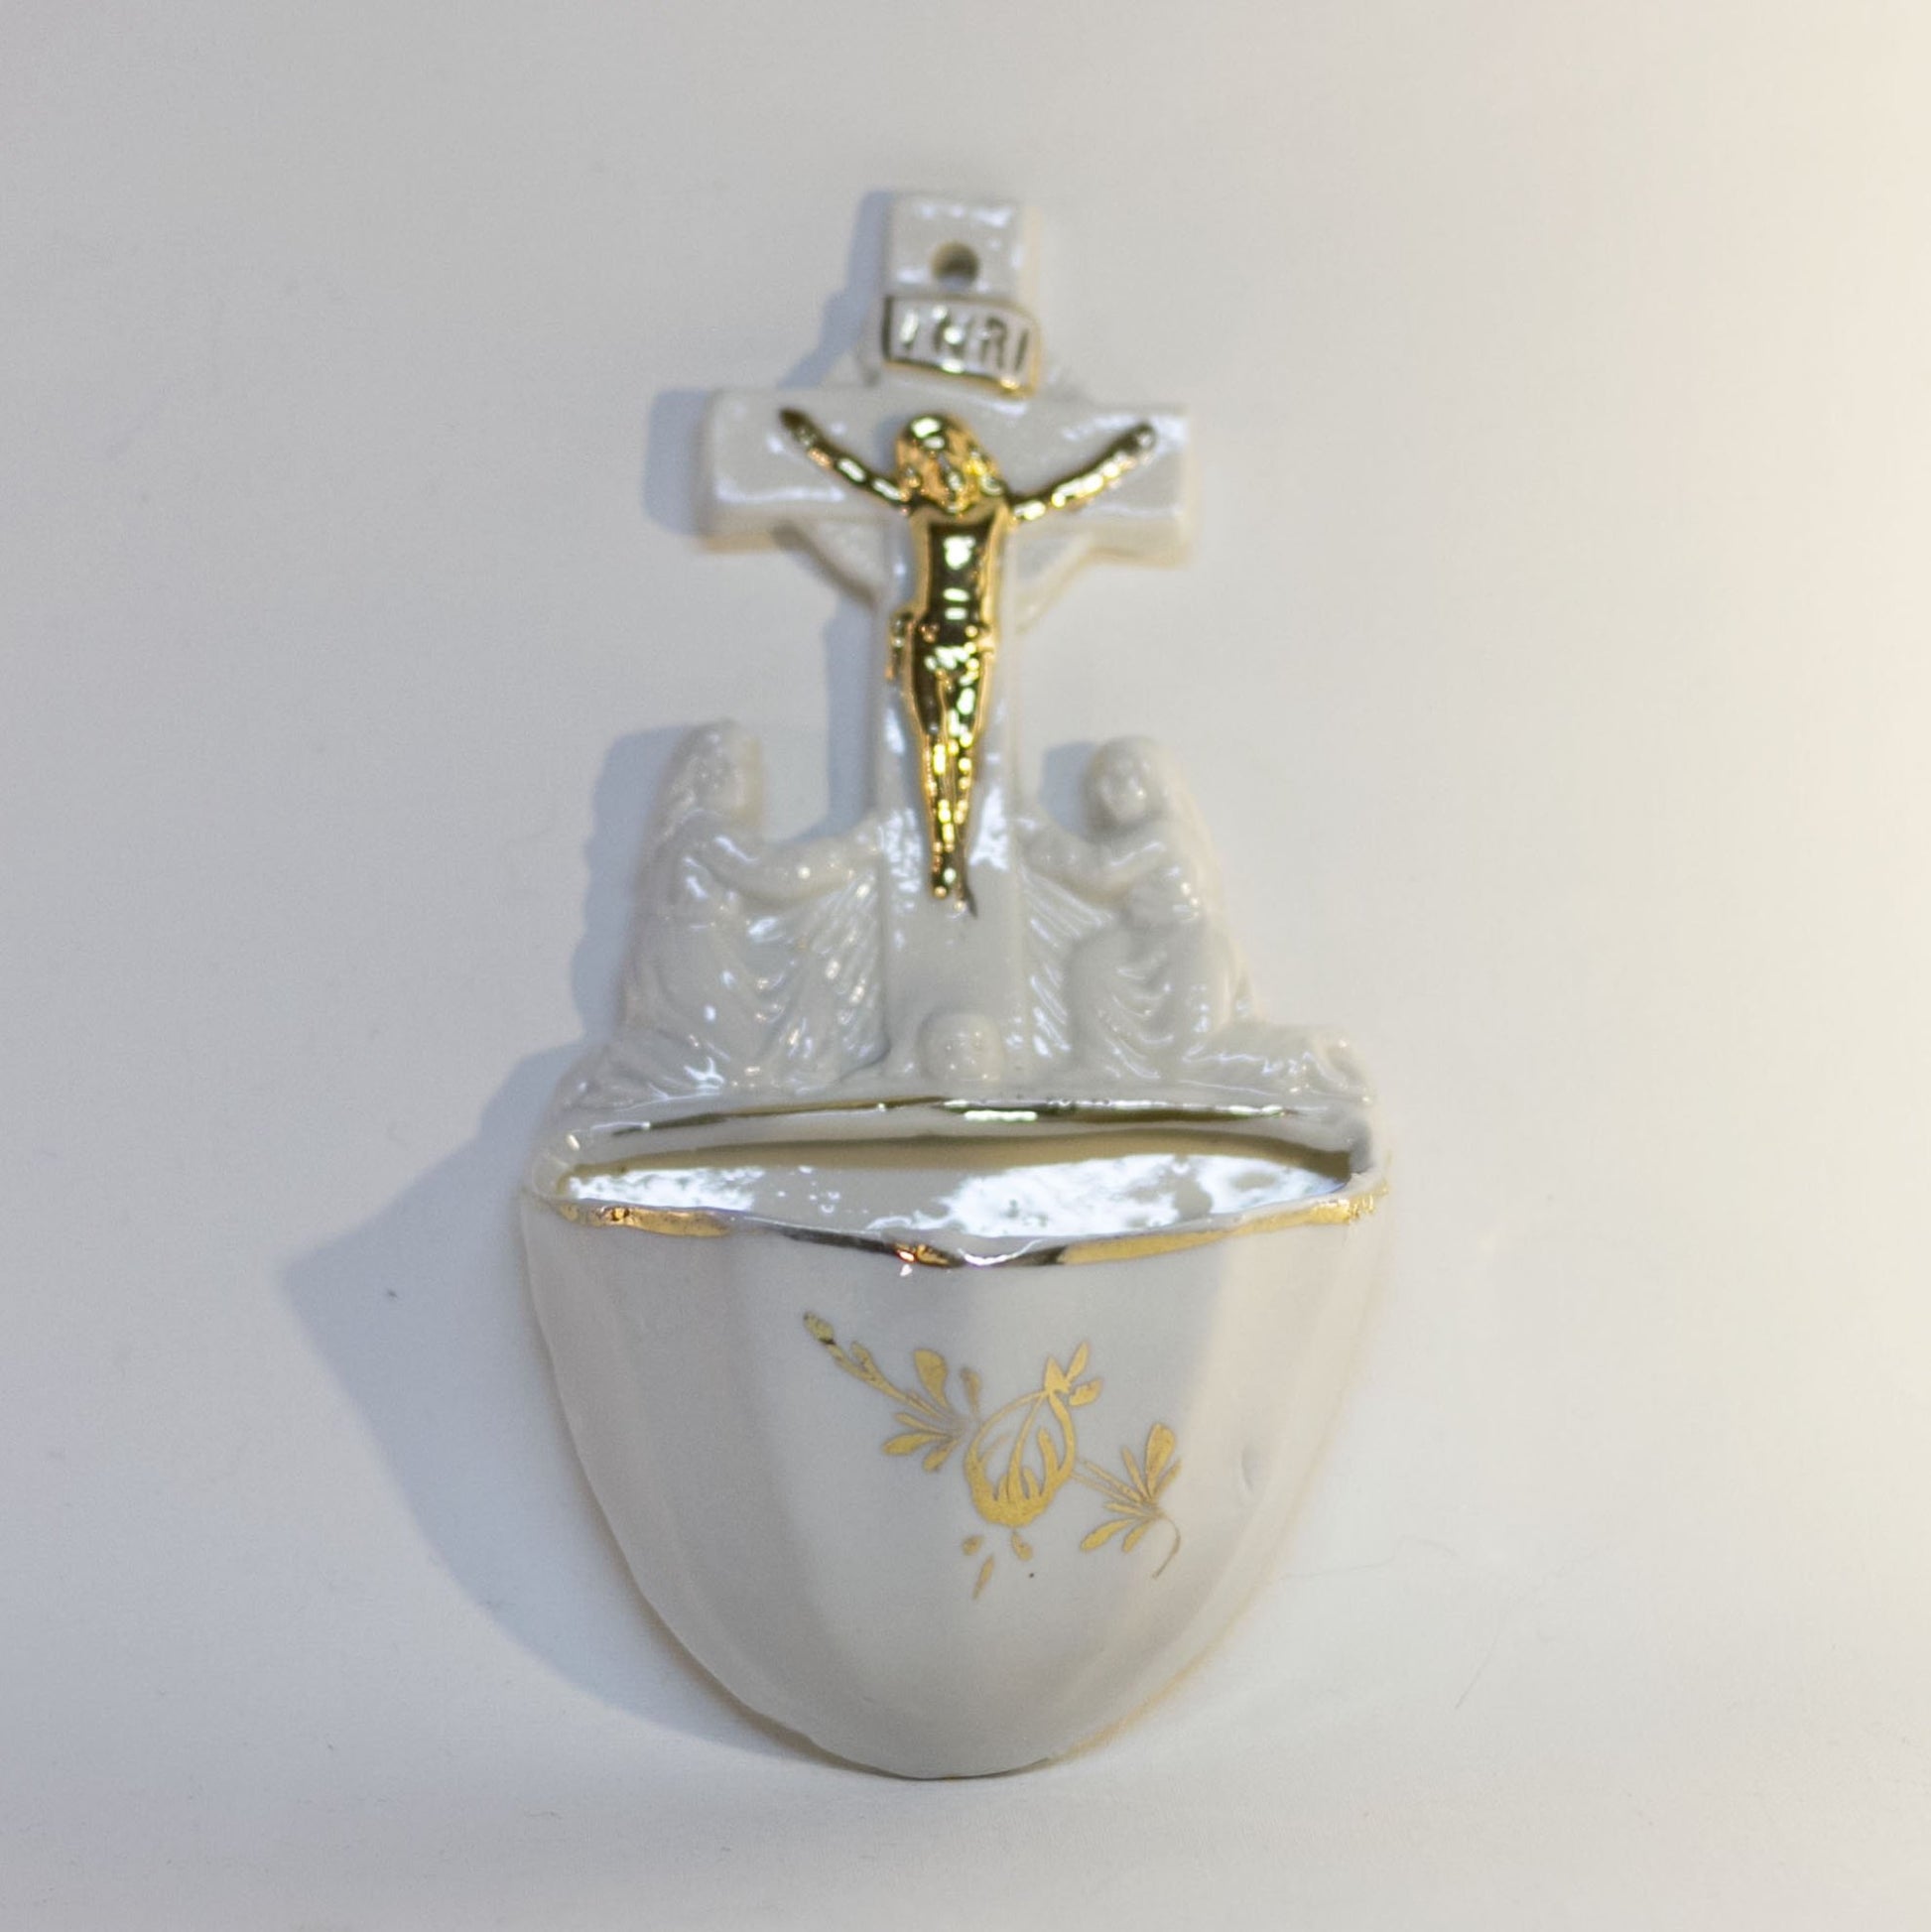 Vintage HOLY WATER FONT Depicting PASSION OF THE CHRIST CRUCIFIX Worshippers Kneeling to Christ and Cross Gold Gilt Hand-Painted Bisque